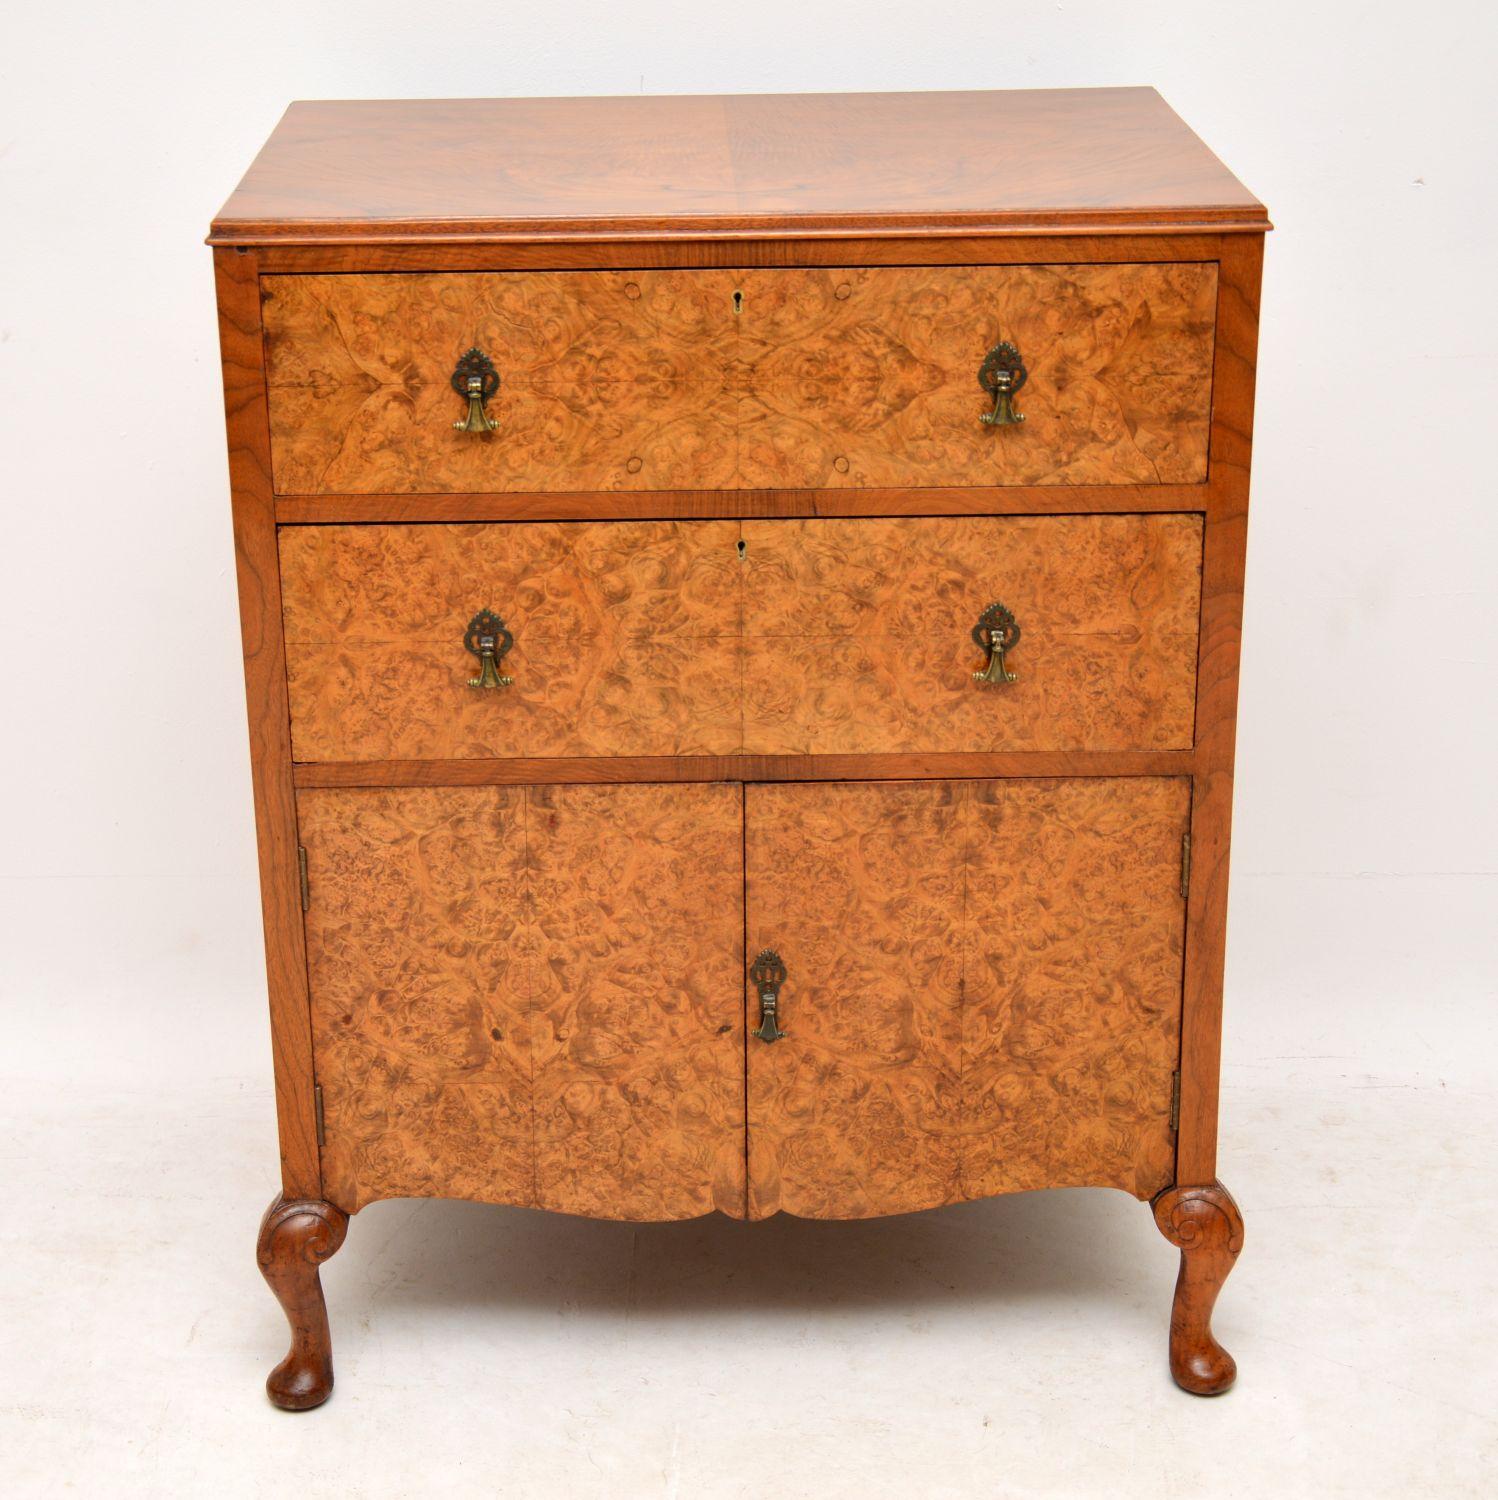 Antique Queen Anne style walnut chest and cupboard combination, which some people would call a tallboy, with two drawers over a cupboard, sitting on solid walnut legs. It dates to around the 1920’s period & is in excellent original condition. This